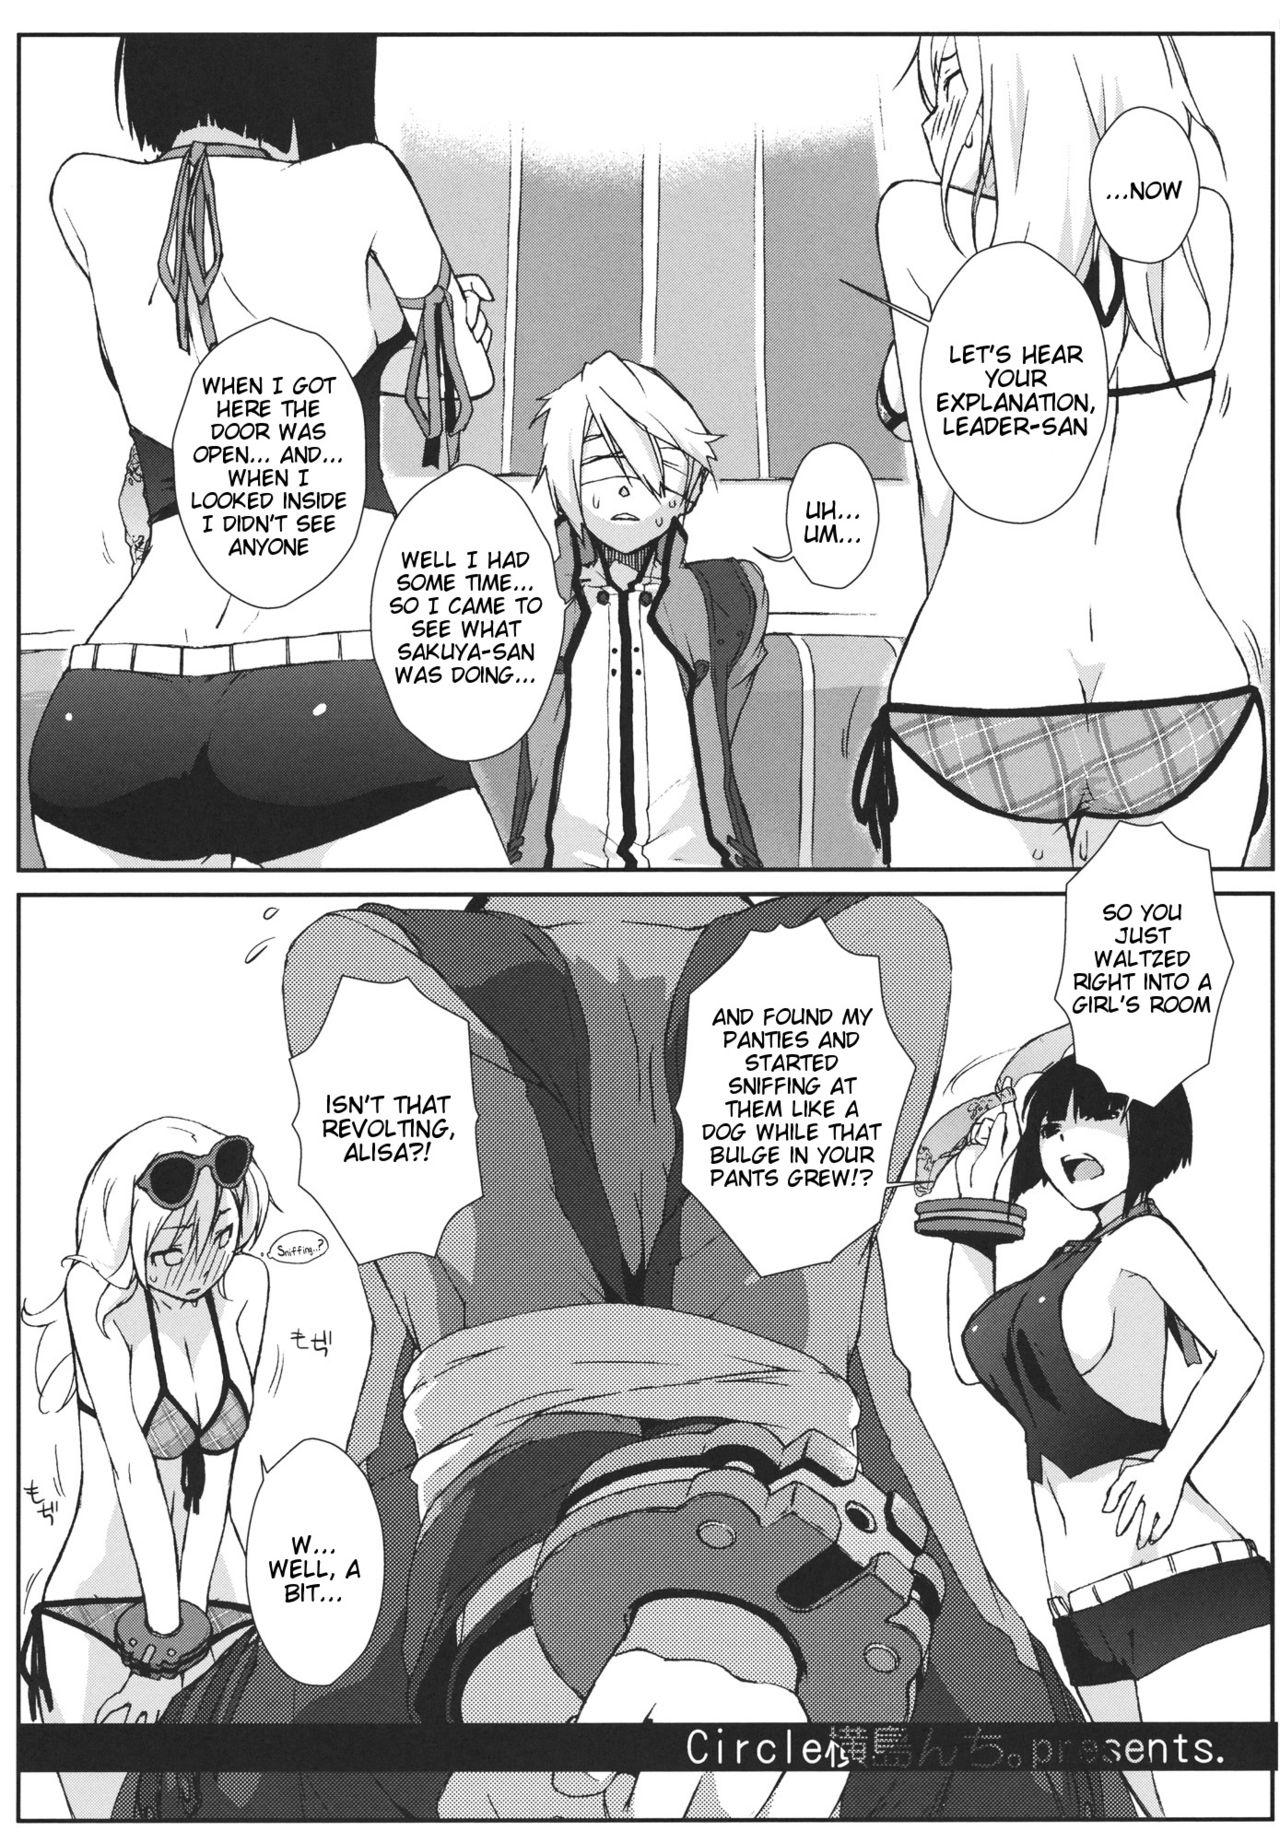 Russian PLAYTHING 2.0 - God eater Freeteenporn - Page 5